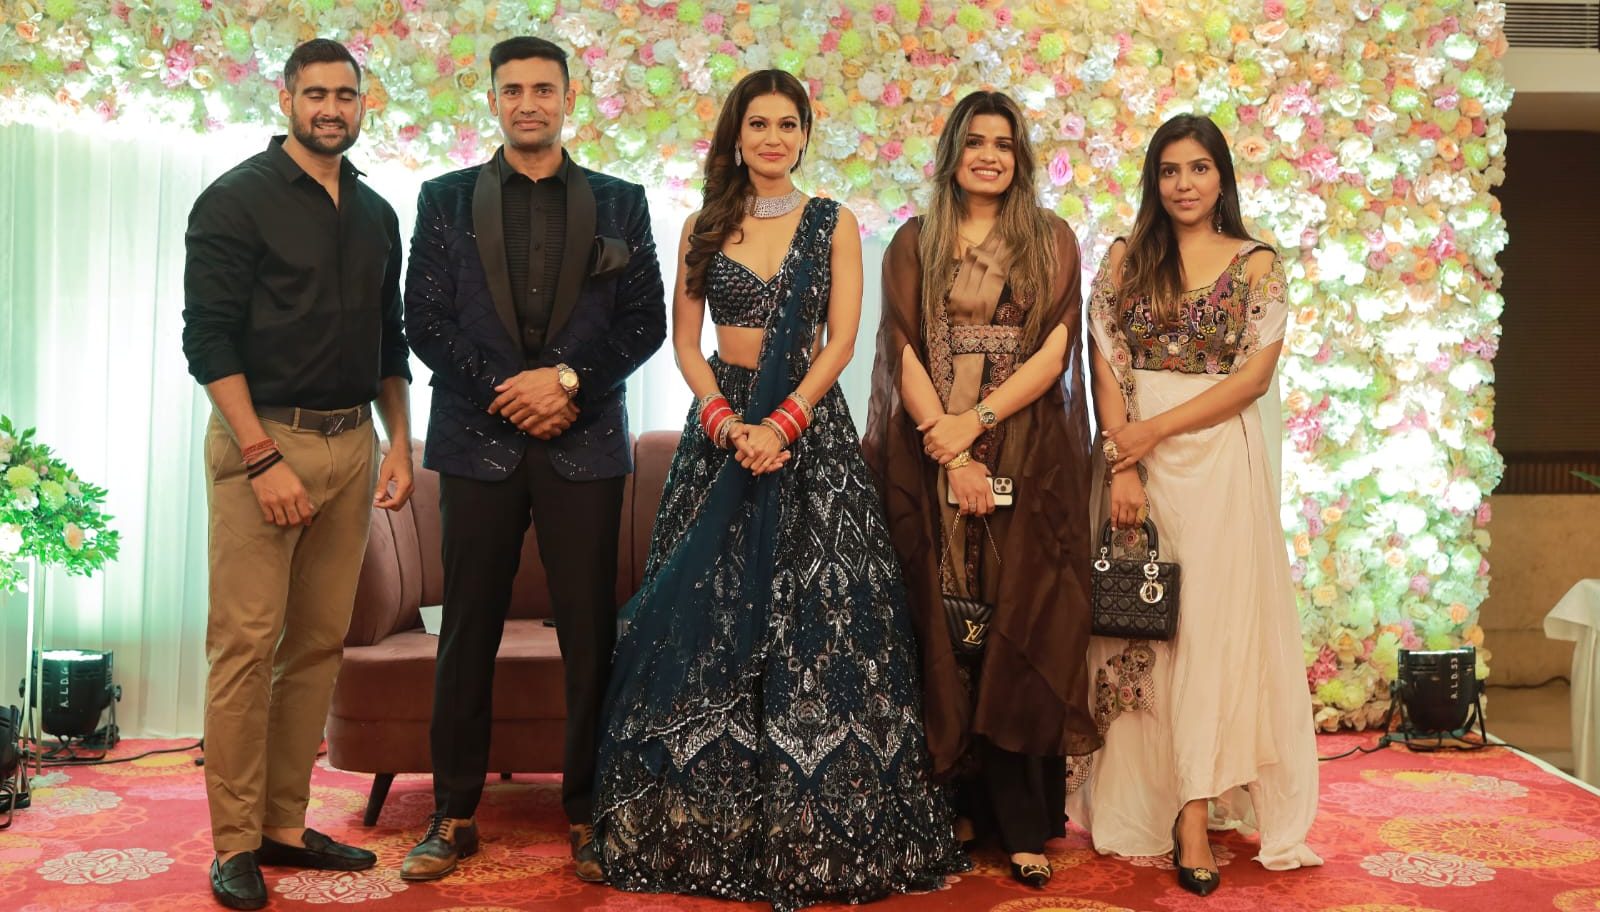 Sangram Singh and Payal Rohatgi hosting multiple receptions, check out photos from Ahmedabad reception!